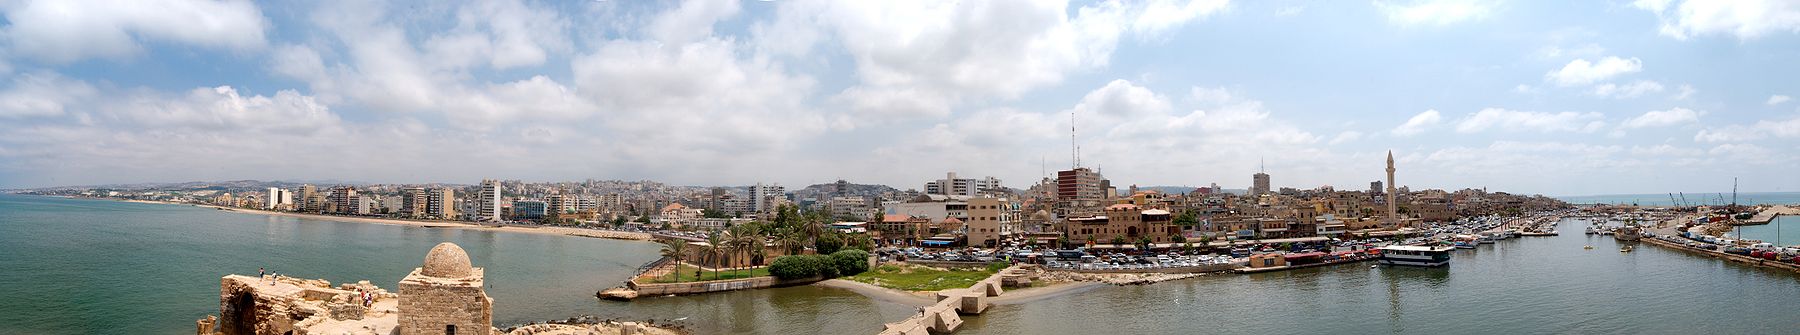 Panorama of Sidon as seen from the top of the Sea Castle, 2009